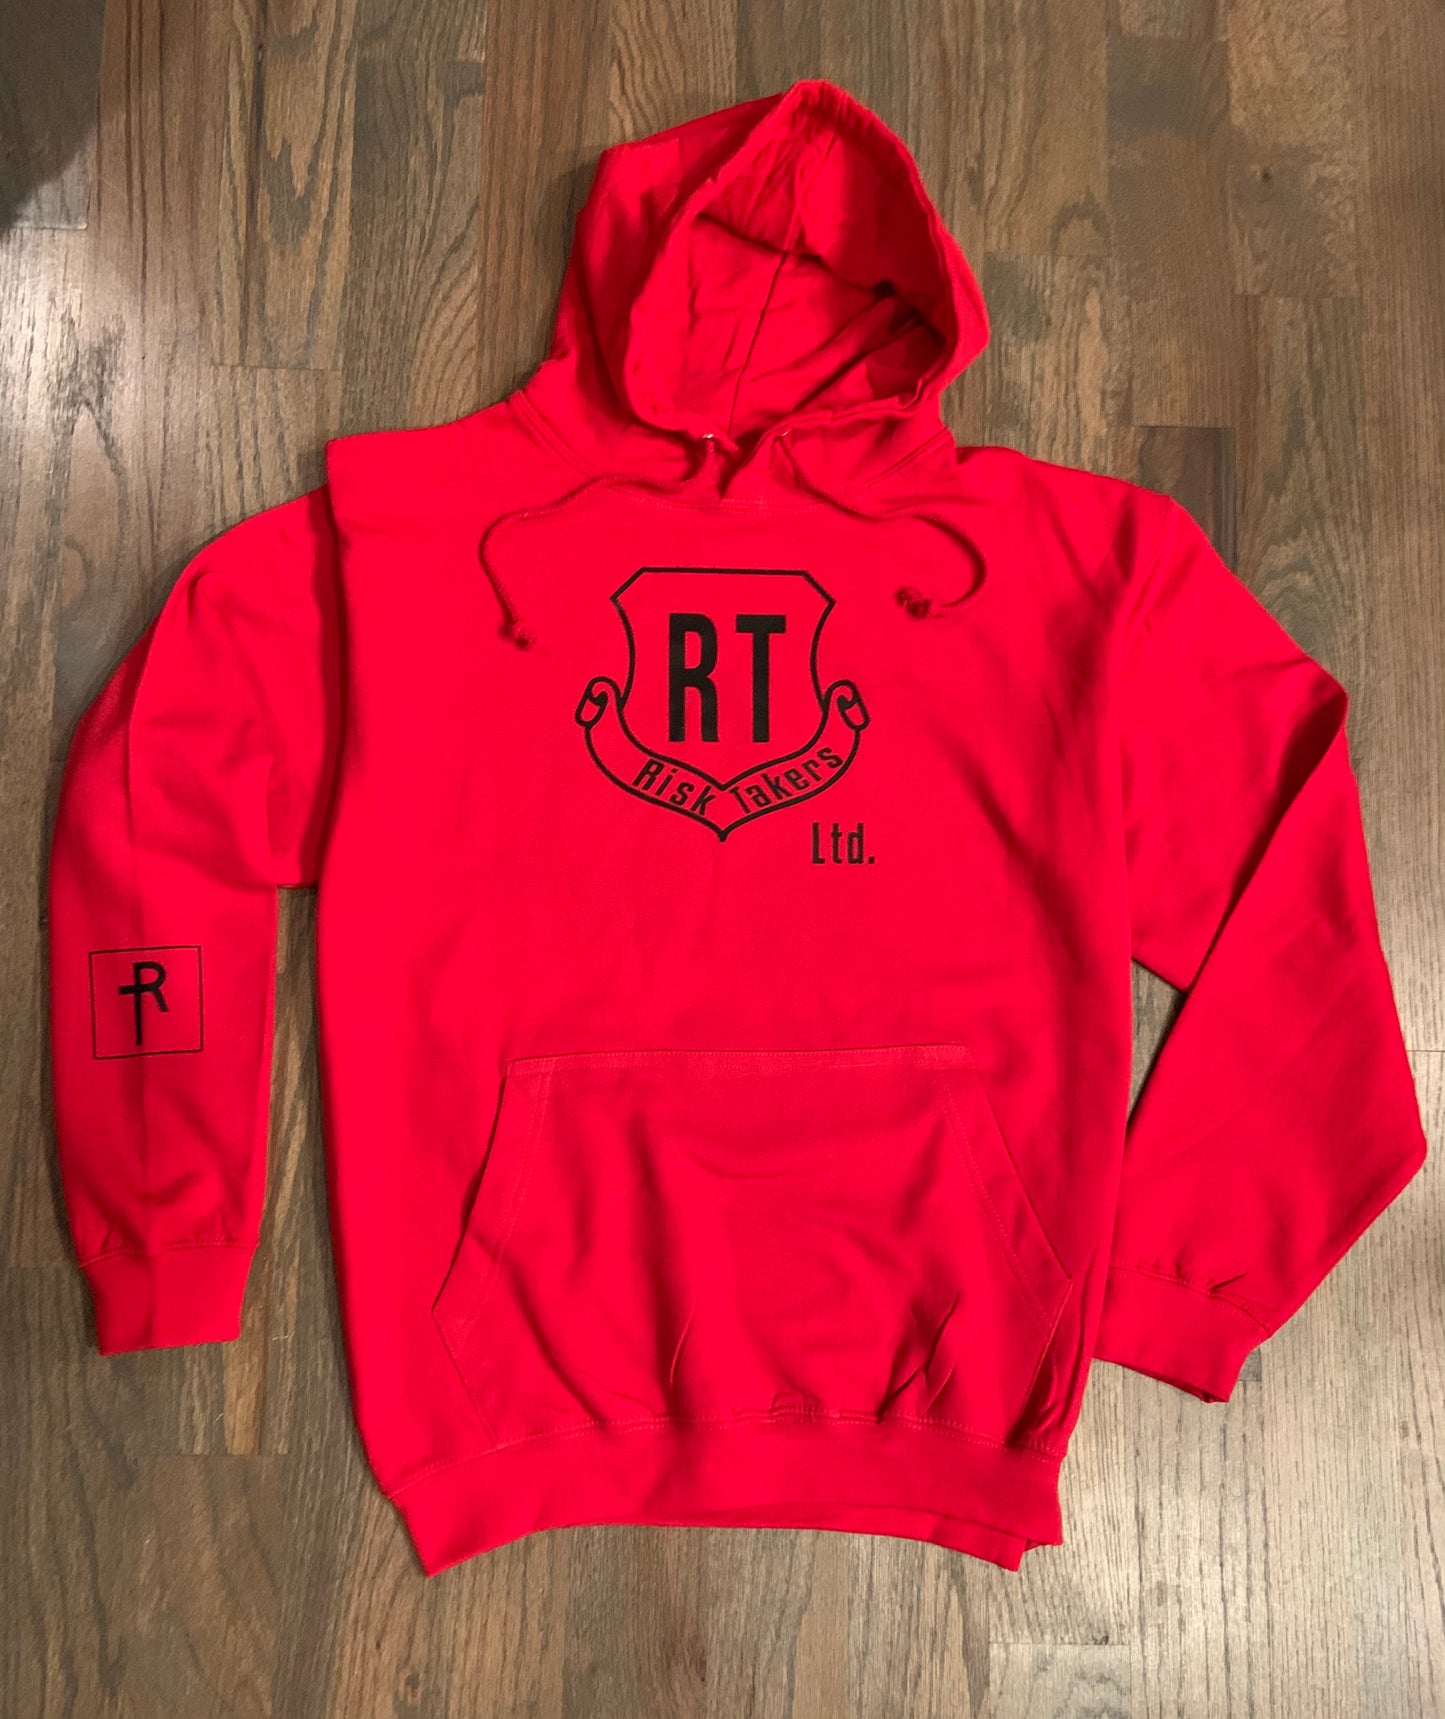 Classic Red Hoody